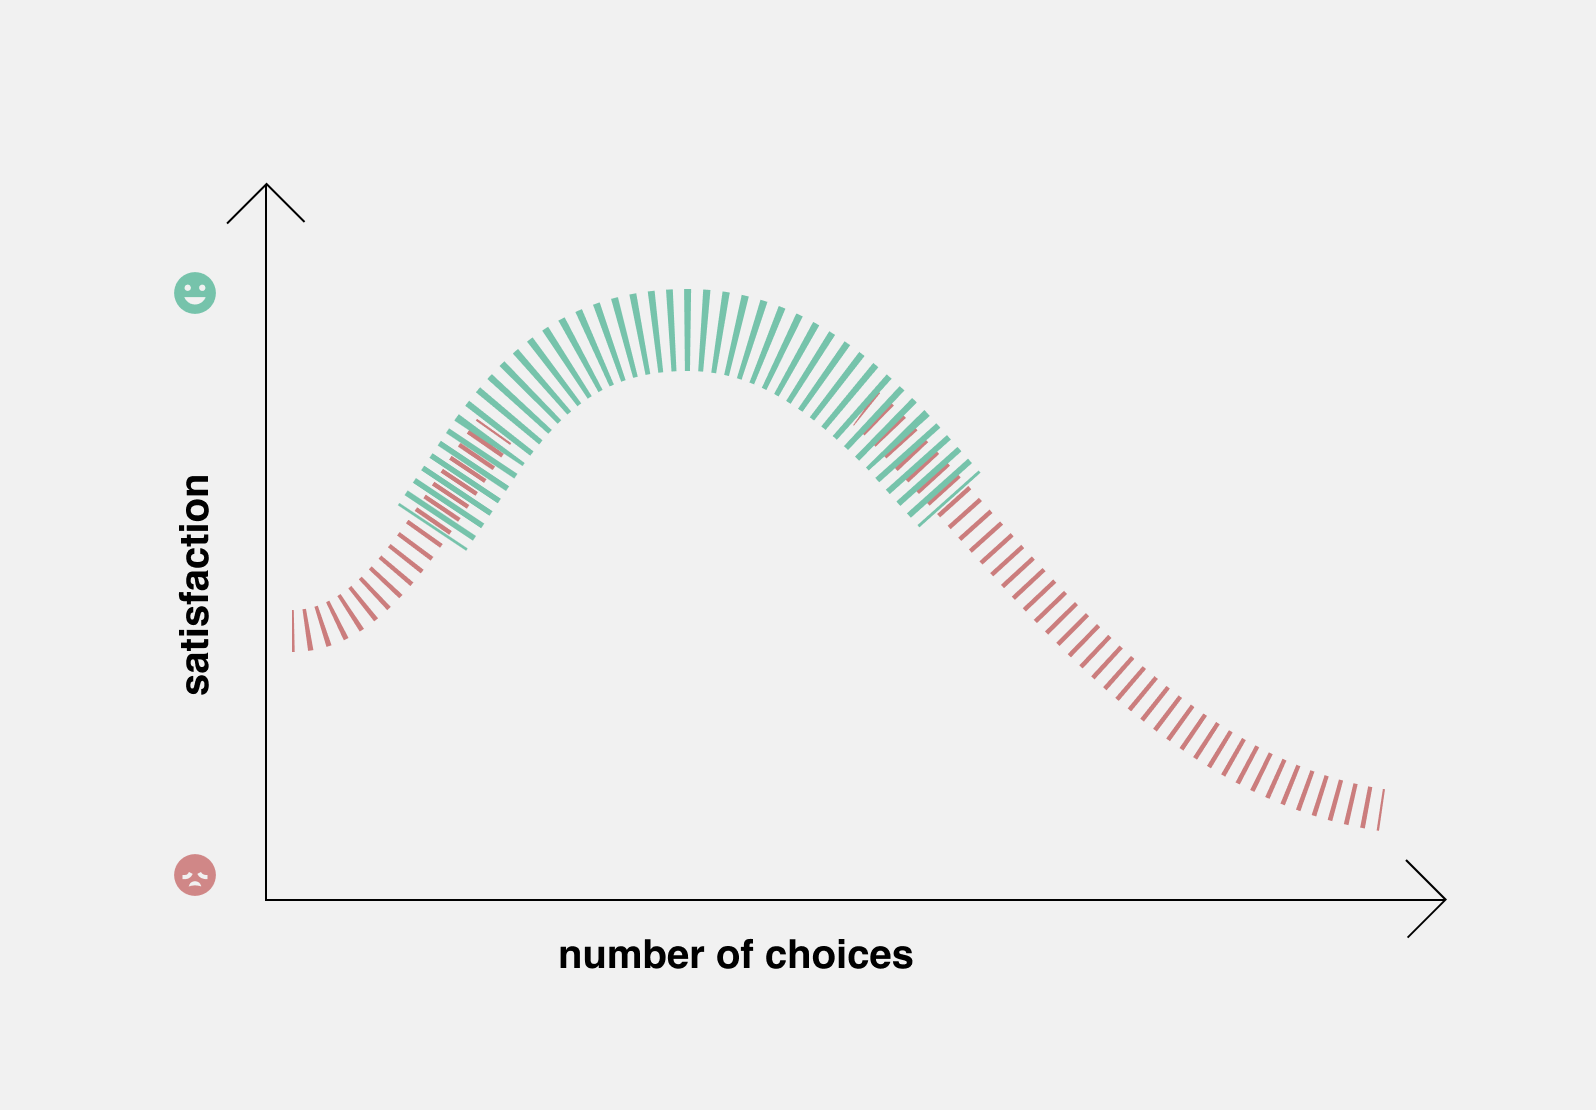 how satisfaction changes with the growing number of choices